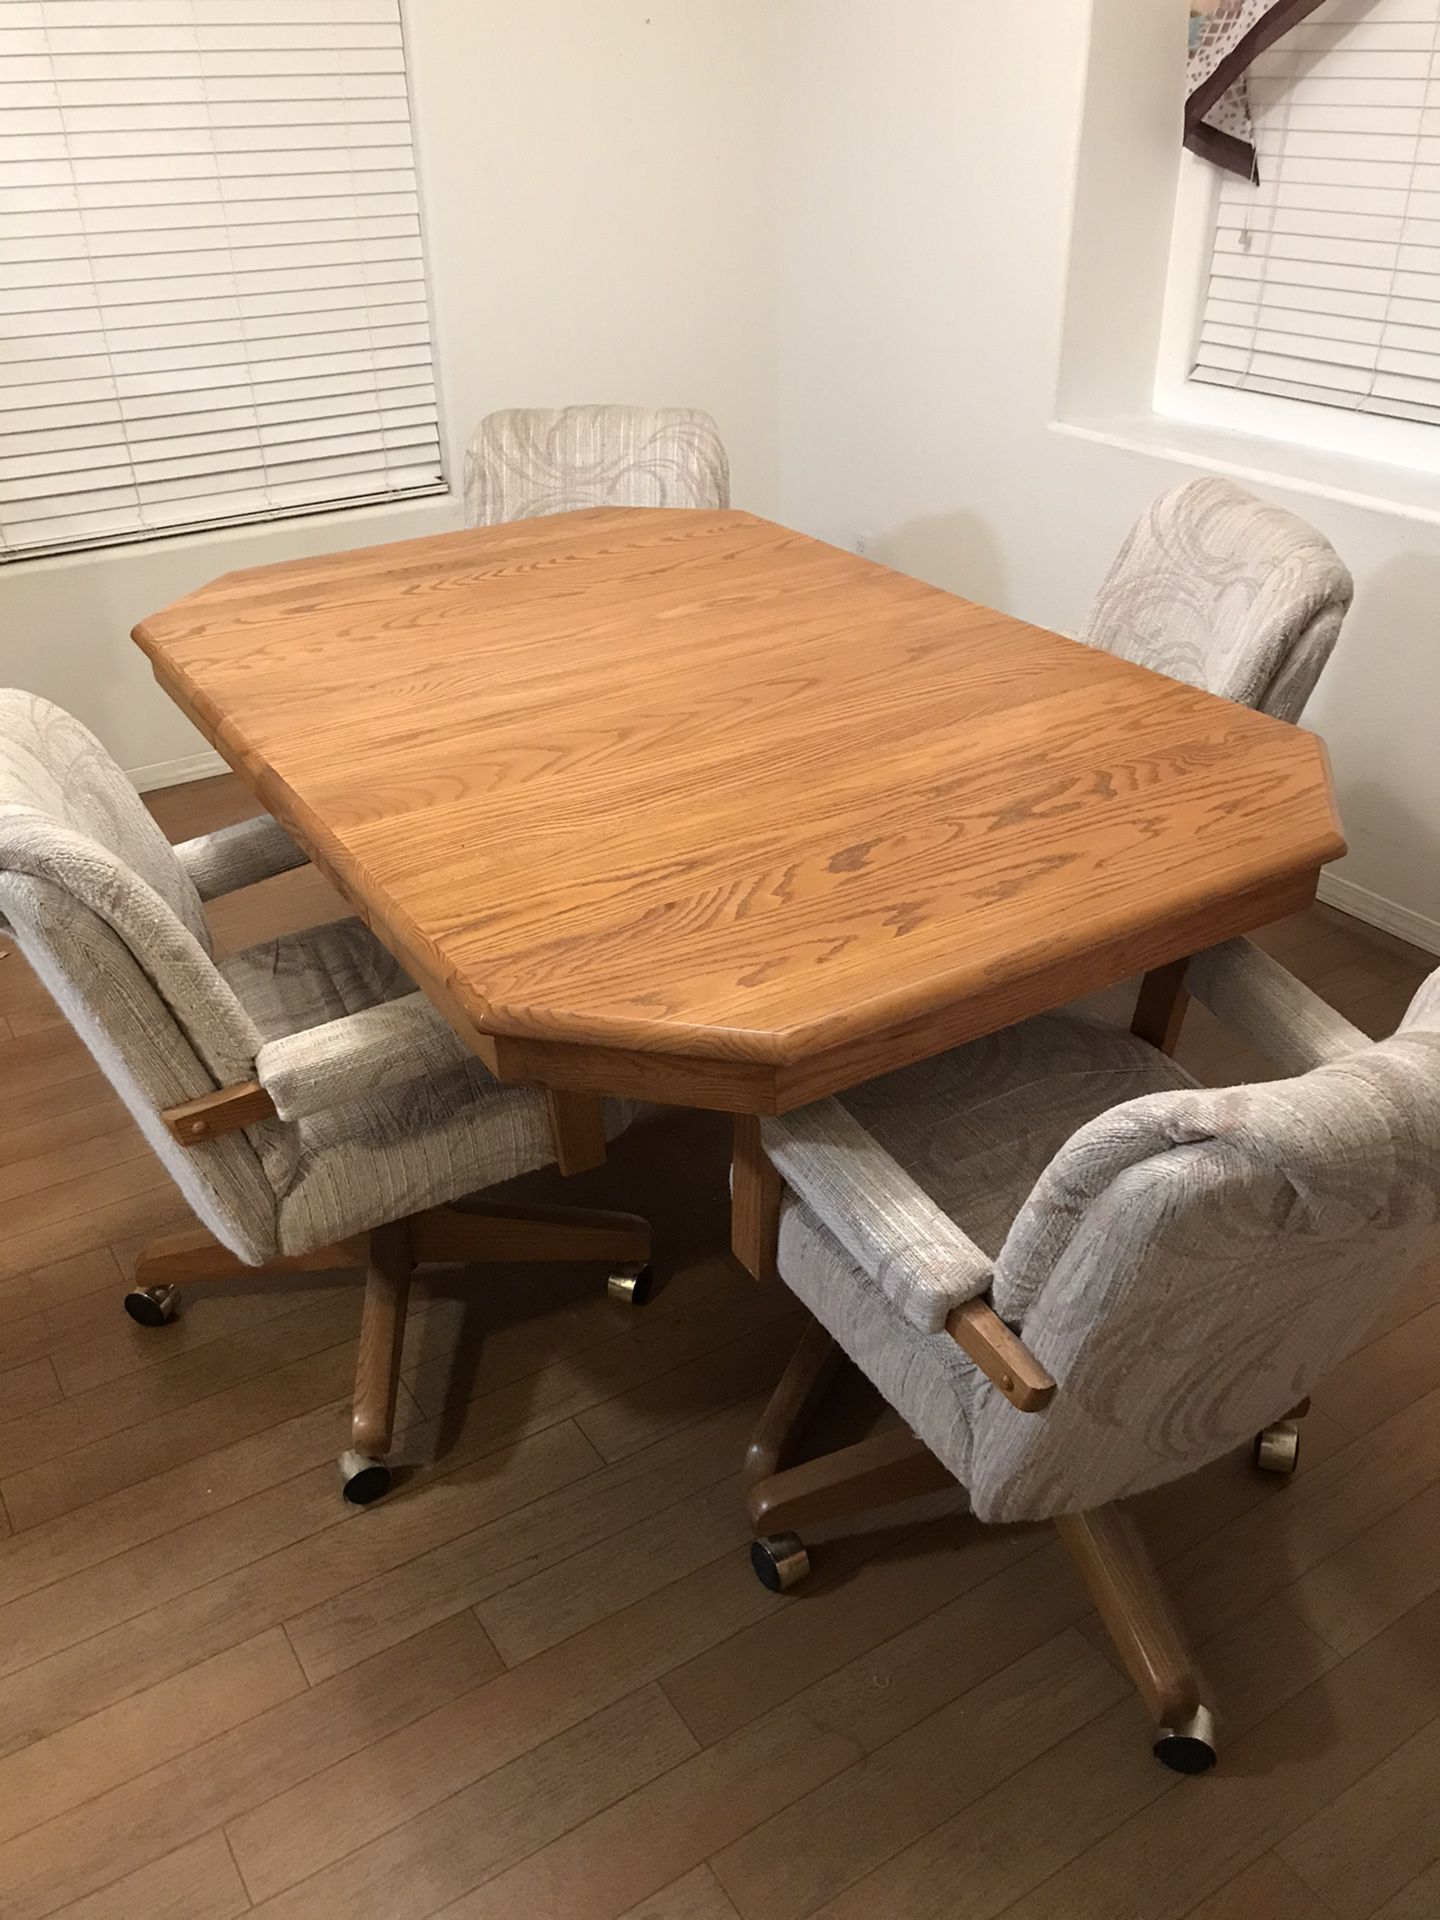 Oak kitchen table with 4 chair set $50.00